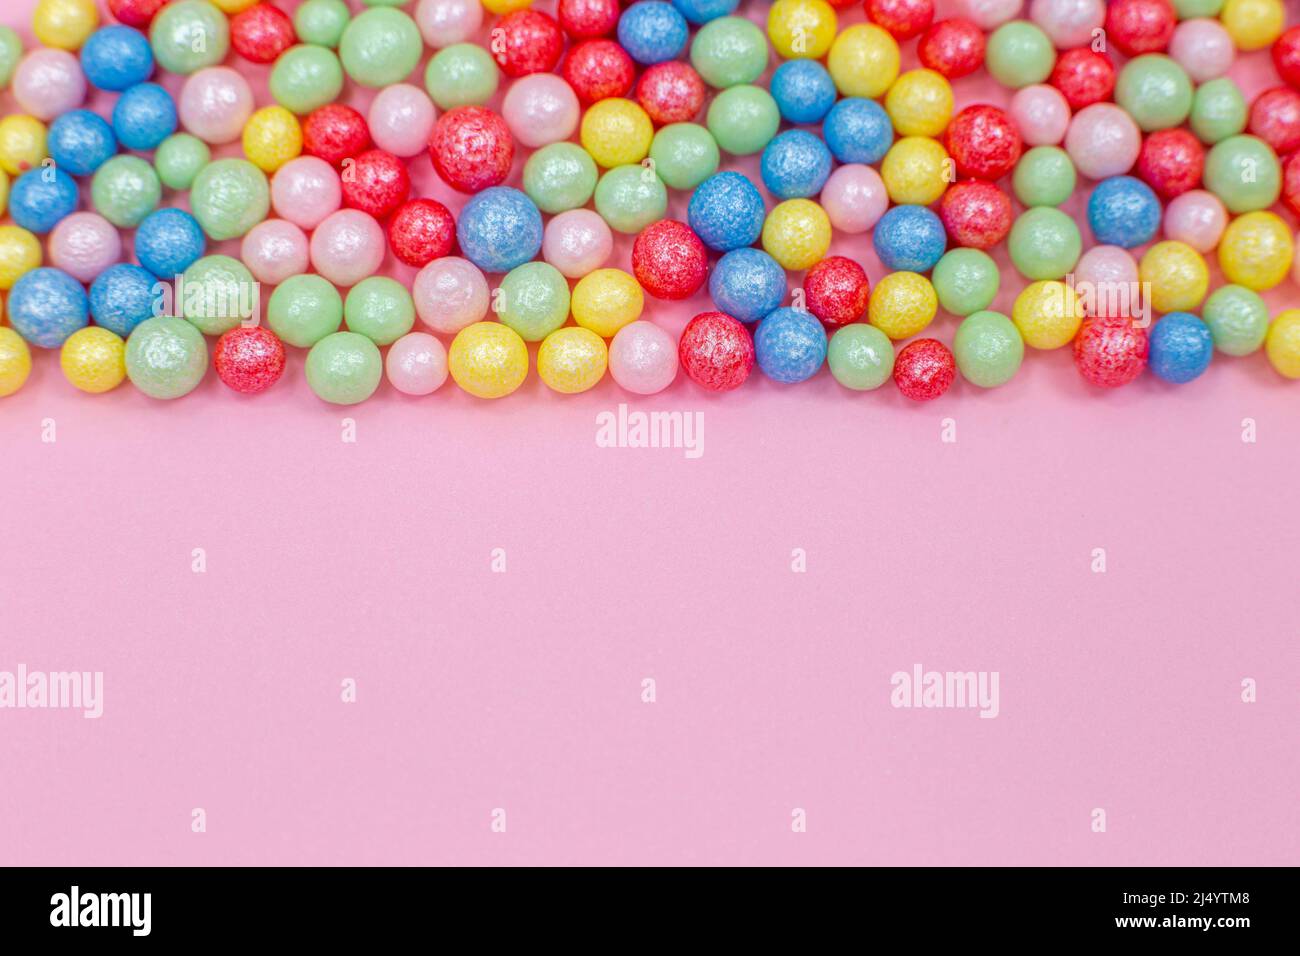 Multi-colored round glossy balls of sugar confectionery topping lie at the top on a pink background. Stock Photo